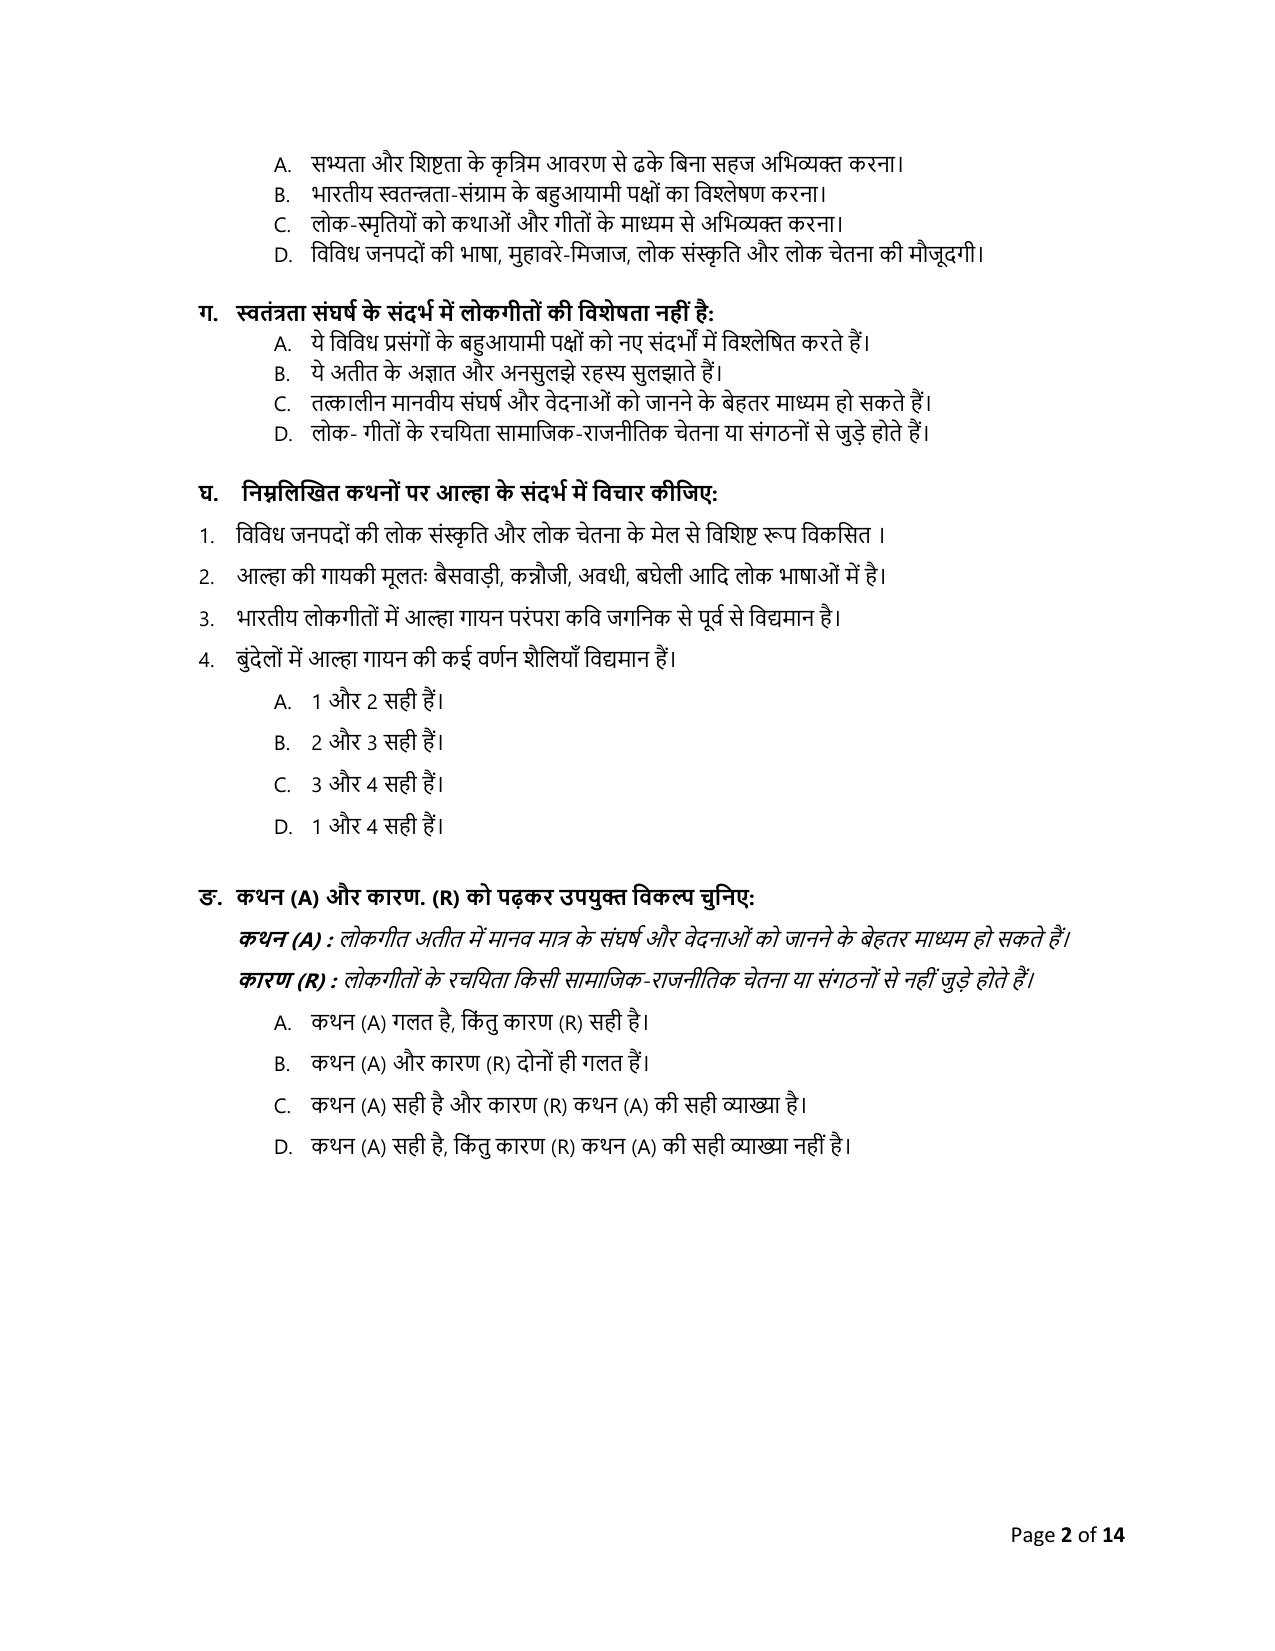 CBSE Class 10 Hindi A Set 2 Practice Questions 2023-24 - Page 2